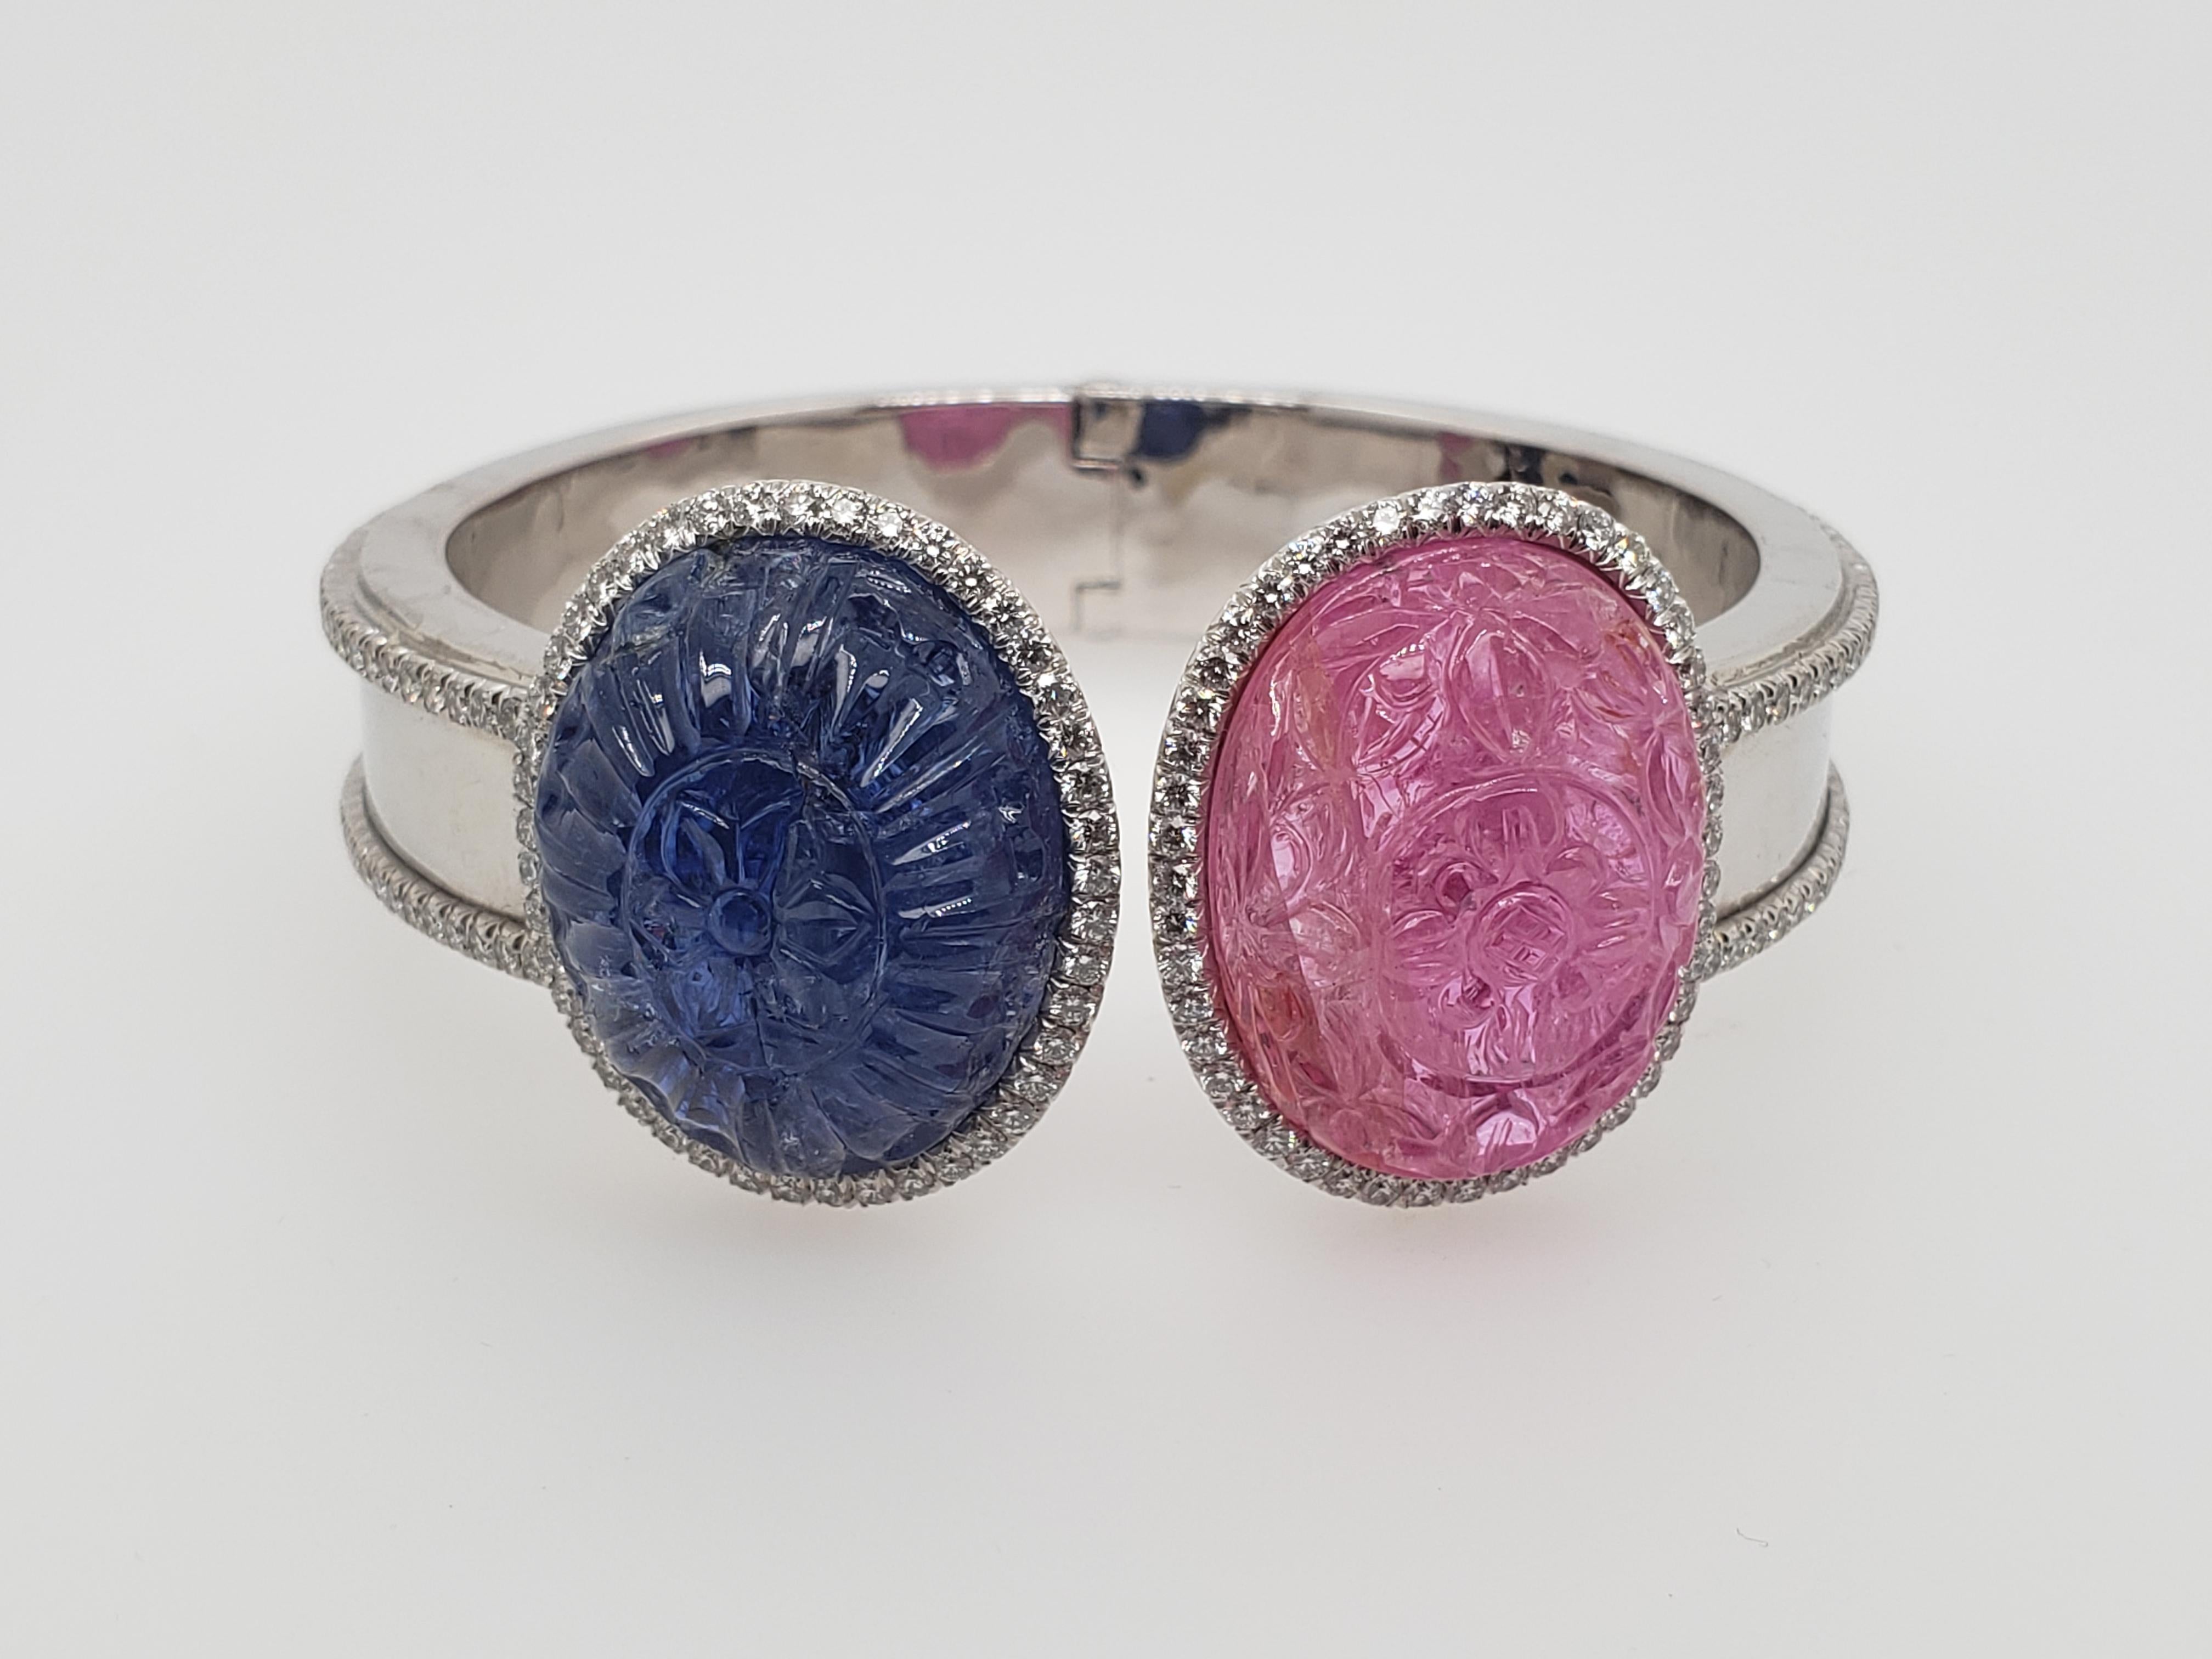 Pink & Blue Carved Cabochon Burma Sapphire & Ruby Bangle

Featuring two Oval-shaped carved with an elaborate floral pattern cabochon Pink and Blue sapphires weighing 49.81 and 46.01 carats, with AGTA Certificates Stating they are of Burma Origin,